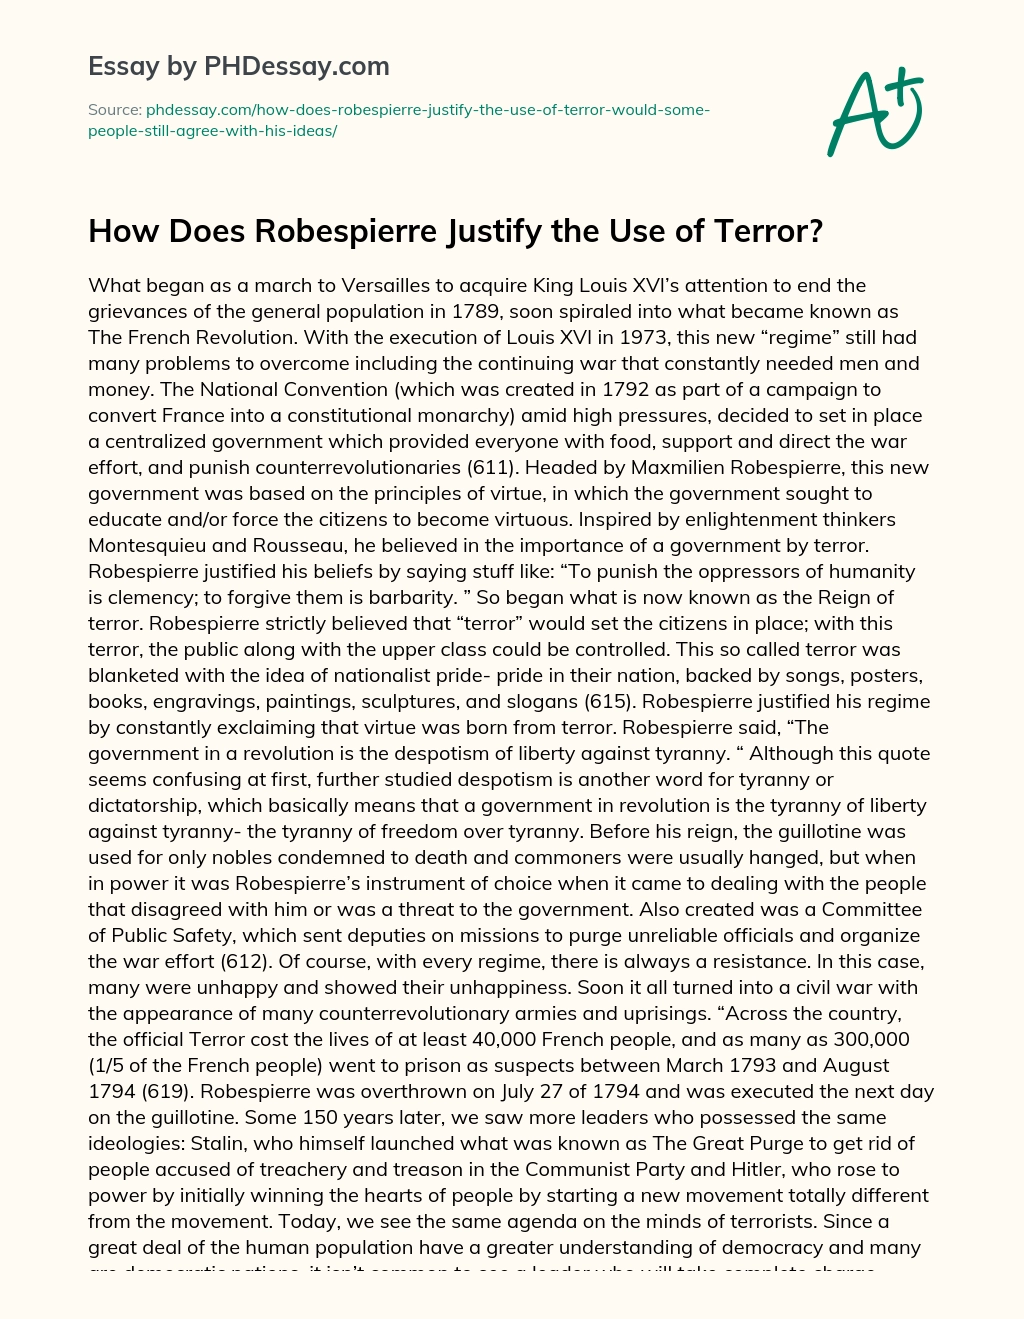 How Does Robespierre Justify the Use of Terror? essay